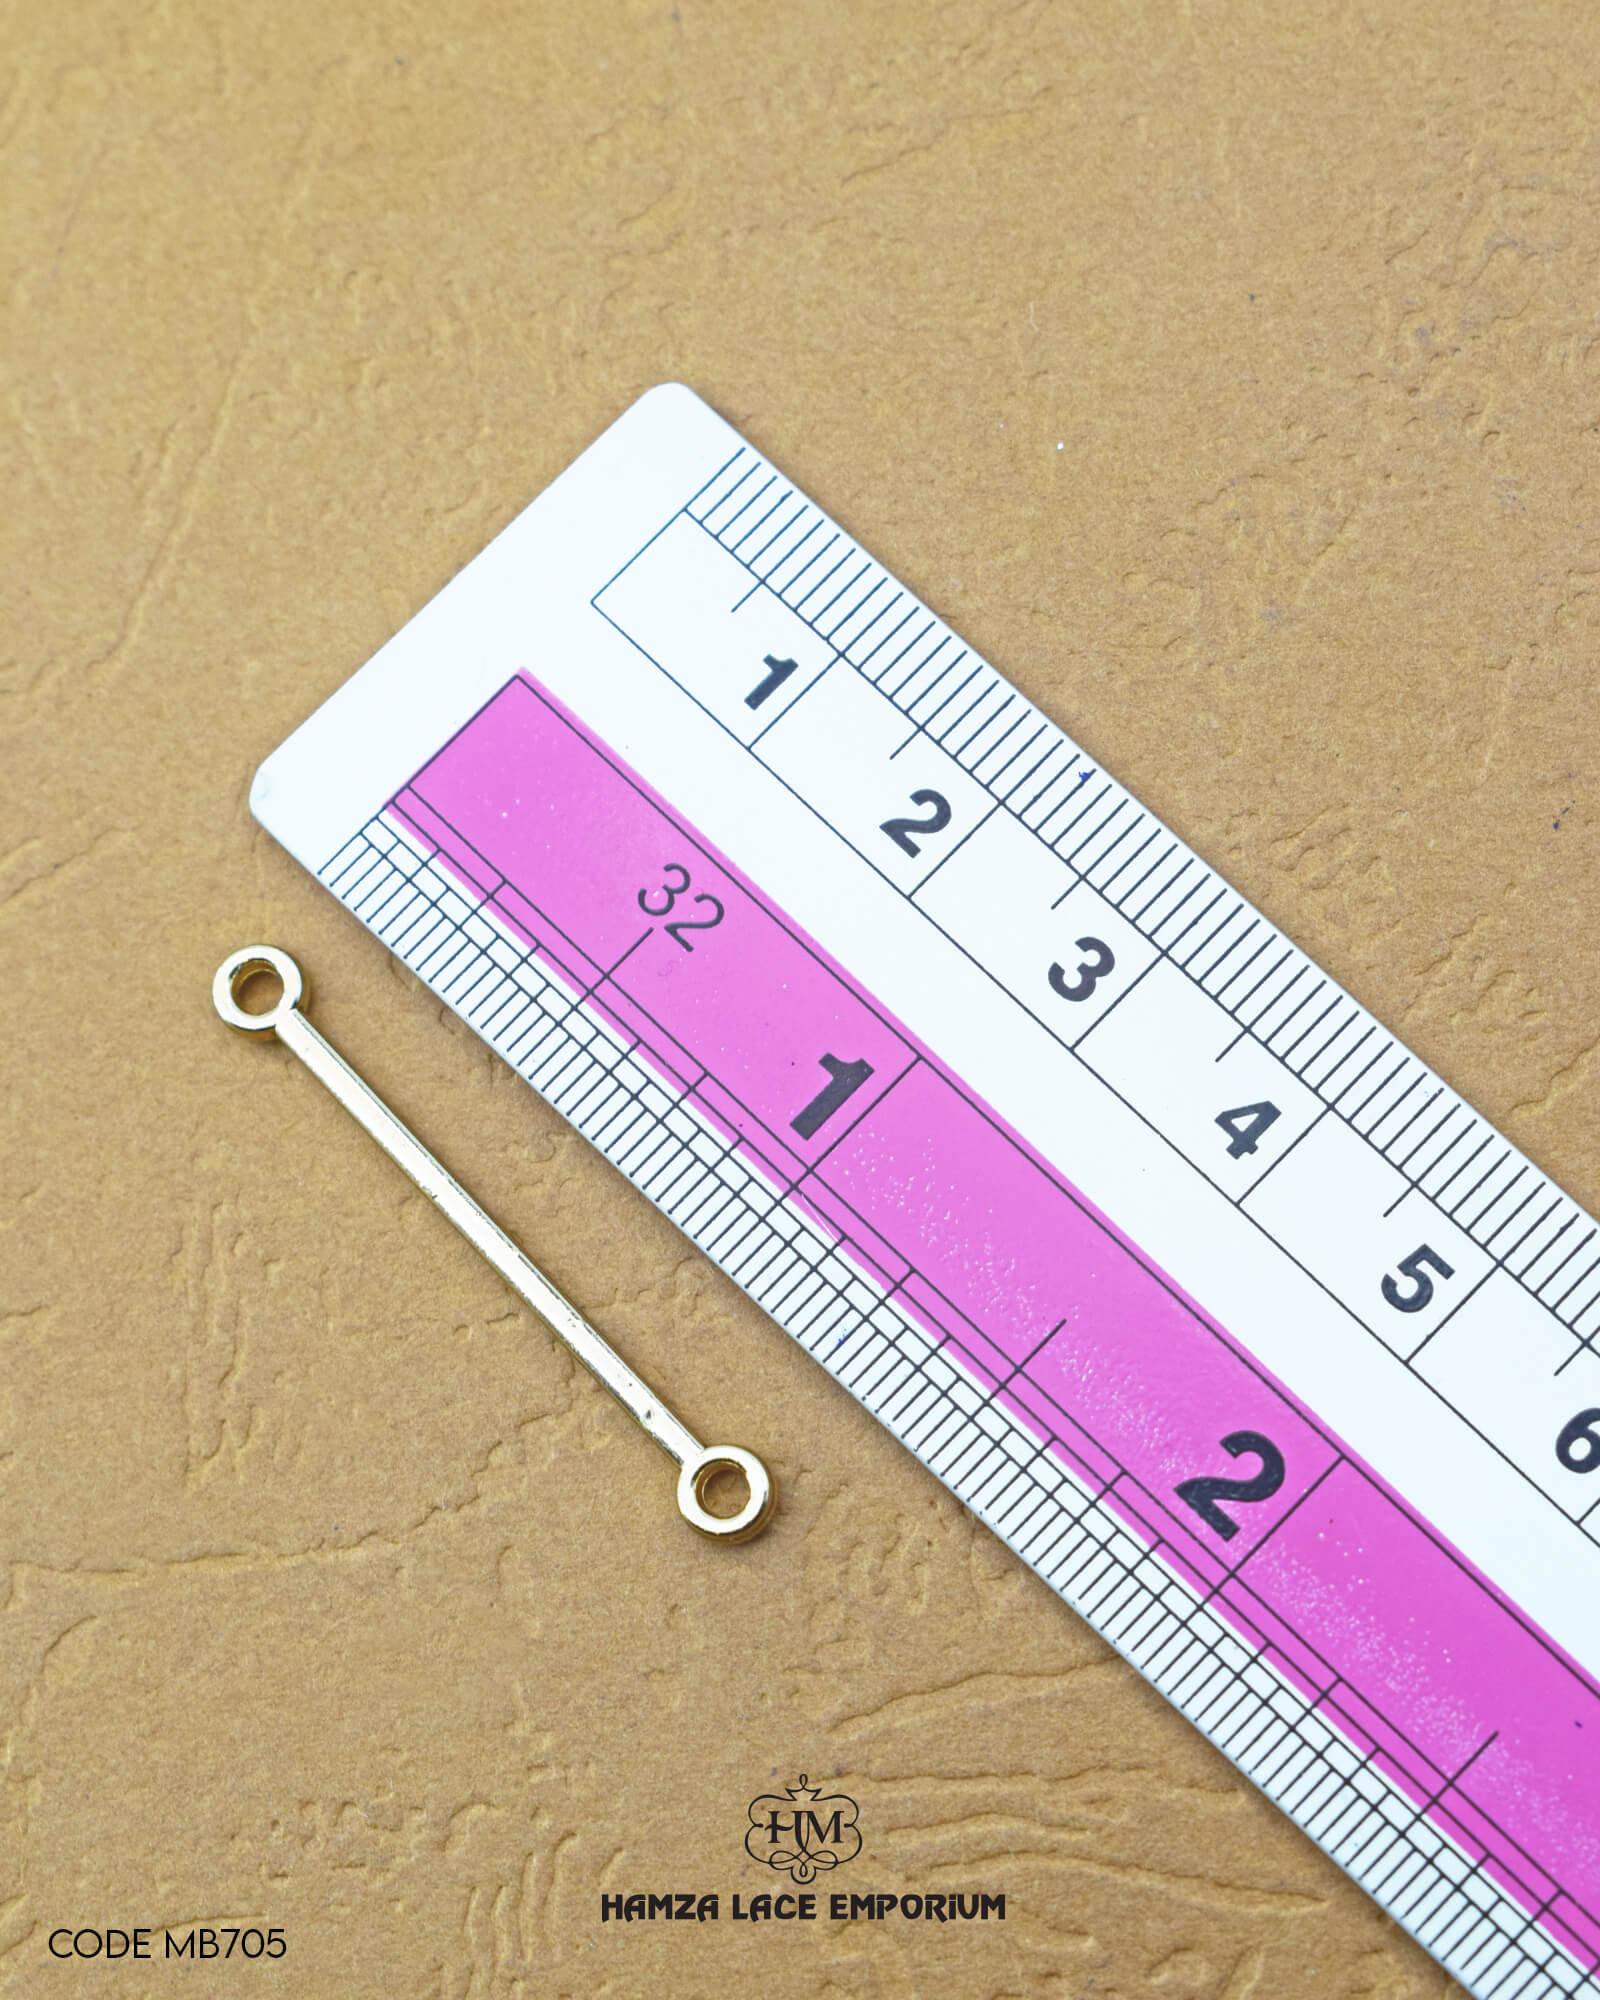 The dimensions of the 'Two Side Hole Stick MB705' are determined using a ruler.